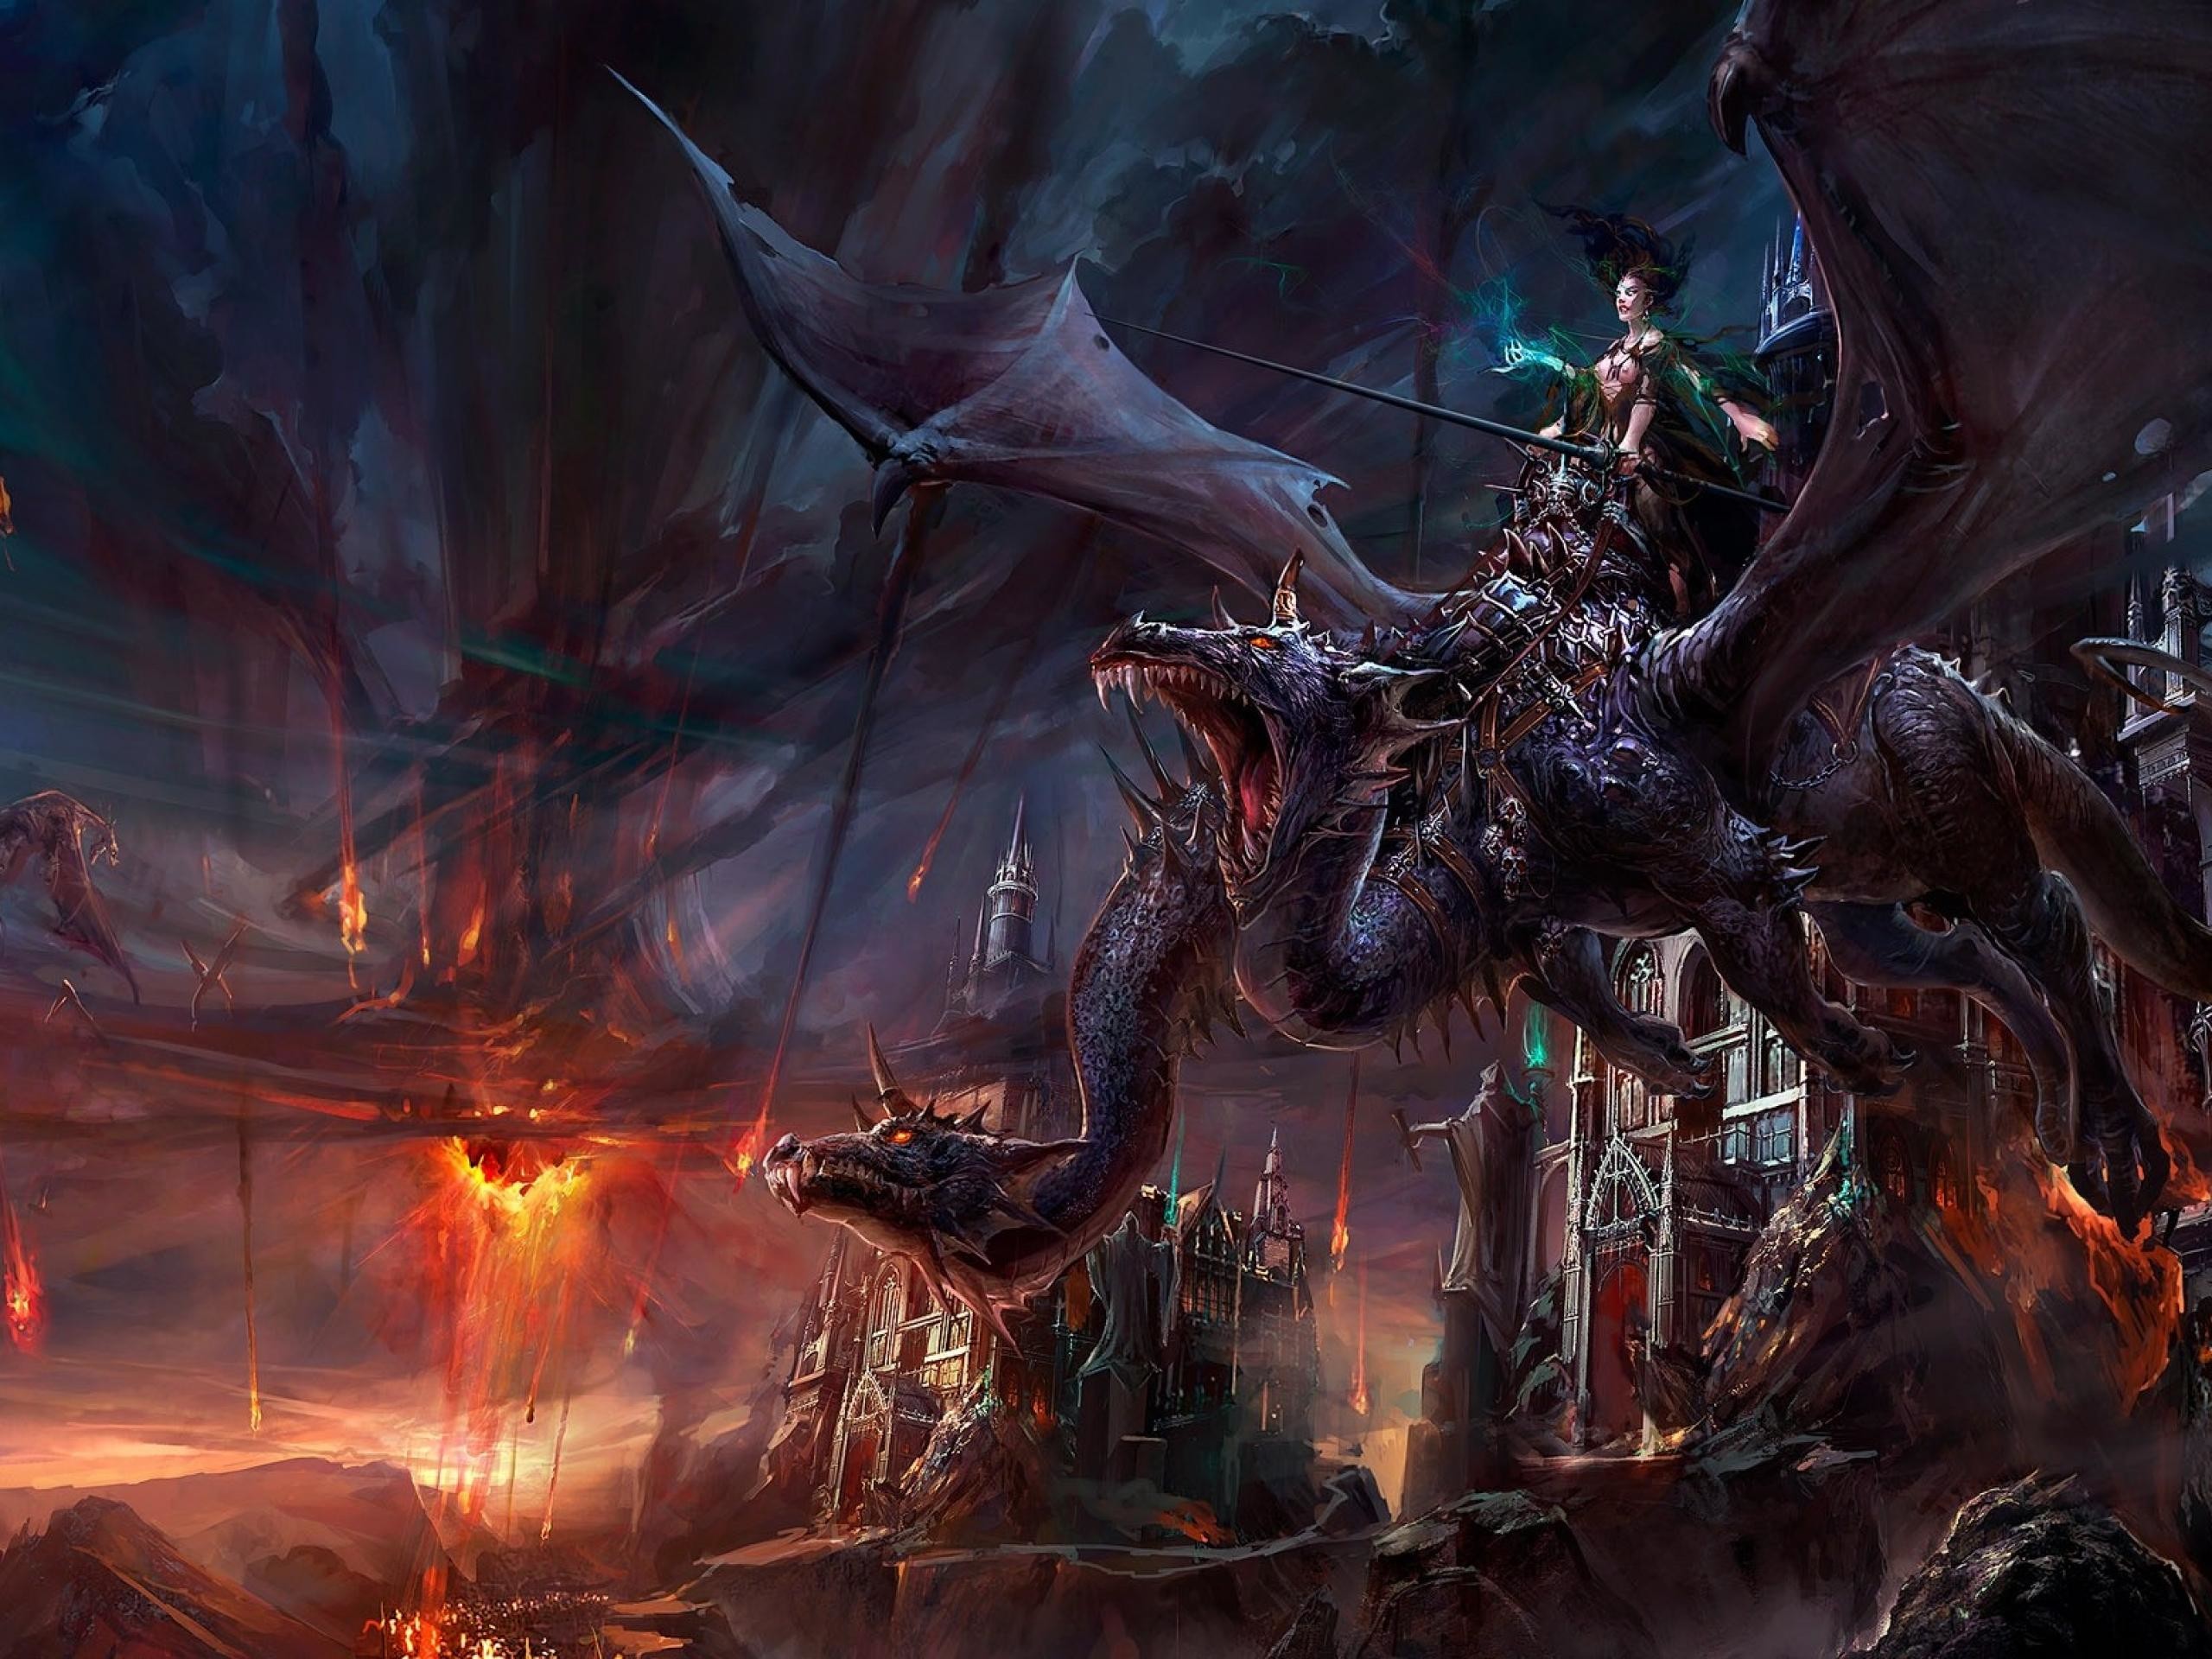 2560x1920 This fantasy wallpaper shows a world where warriors ride dragons and battle  it out in the sky. This dragon also seems like a beast that would only rise  on ...